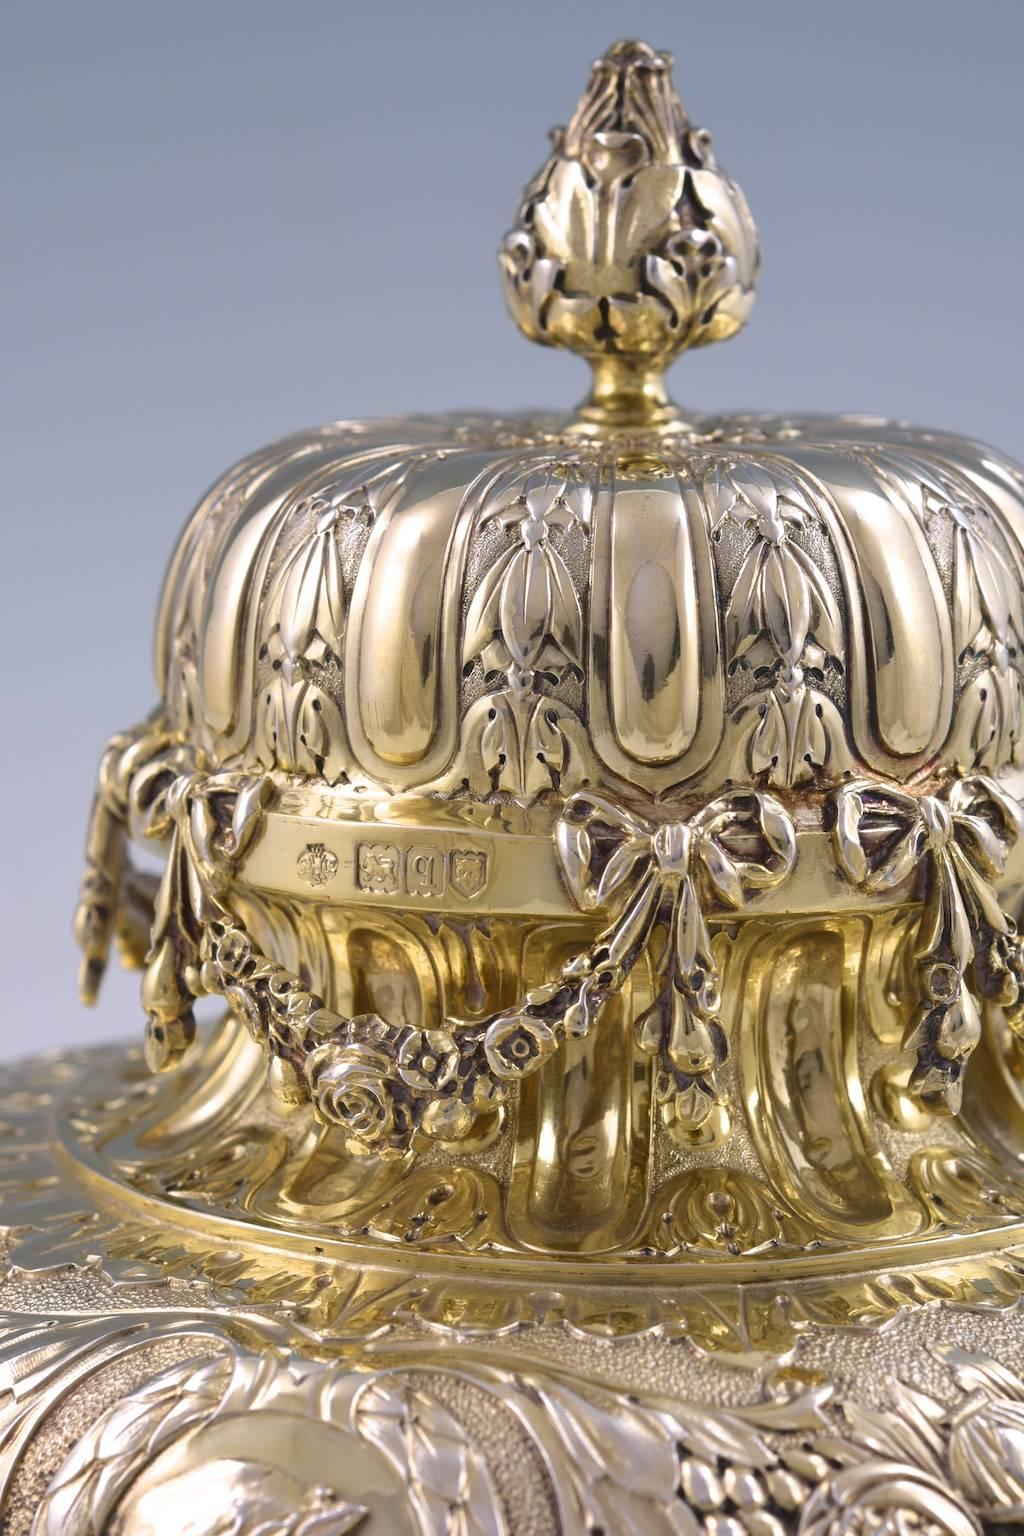 The body decorated with chased floral motifs, four laurel wreath lozenges with applied profile portraits in silver-gilt. The removable lid applied with cast floral swags

fully hallmarked on the base and on the rim of the lid

By William Hutton